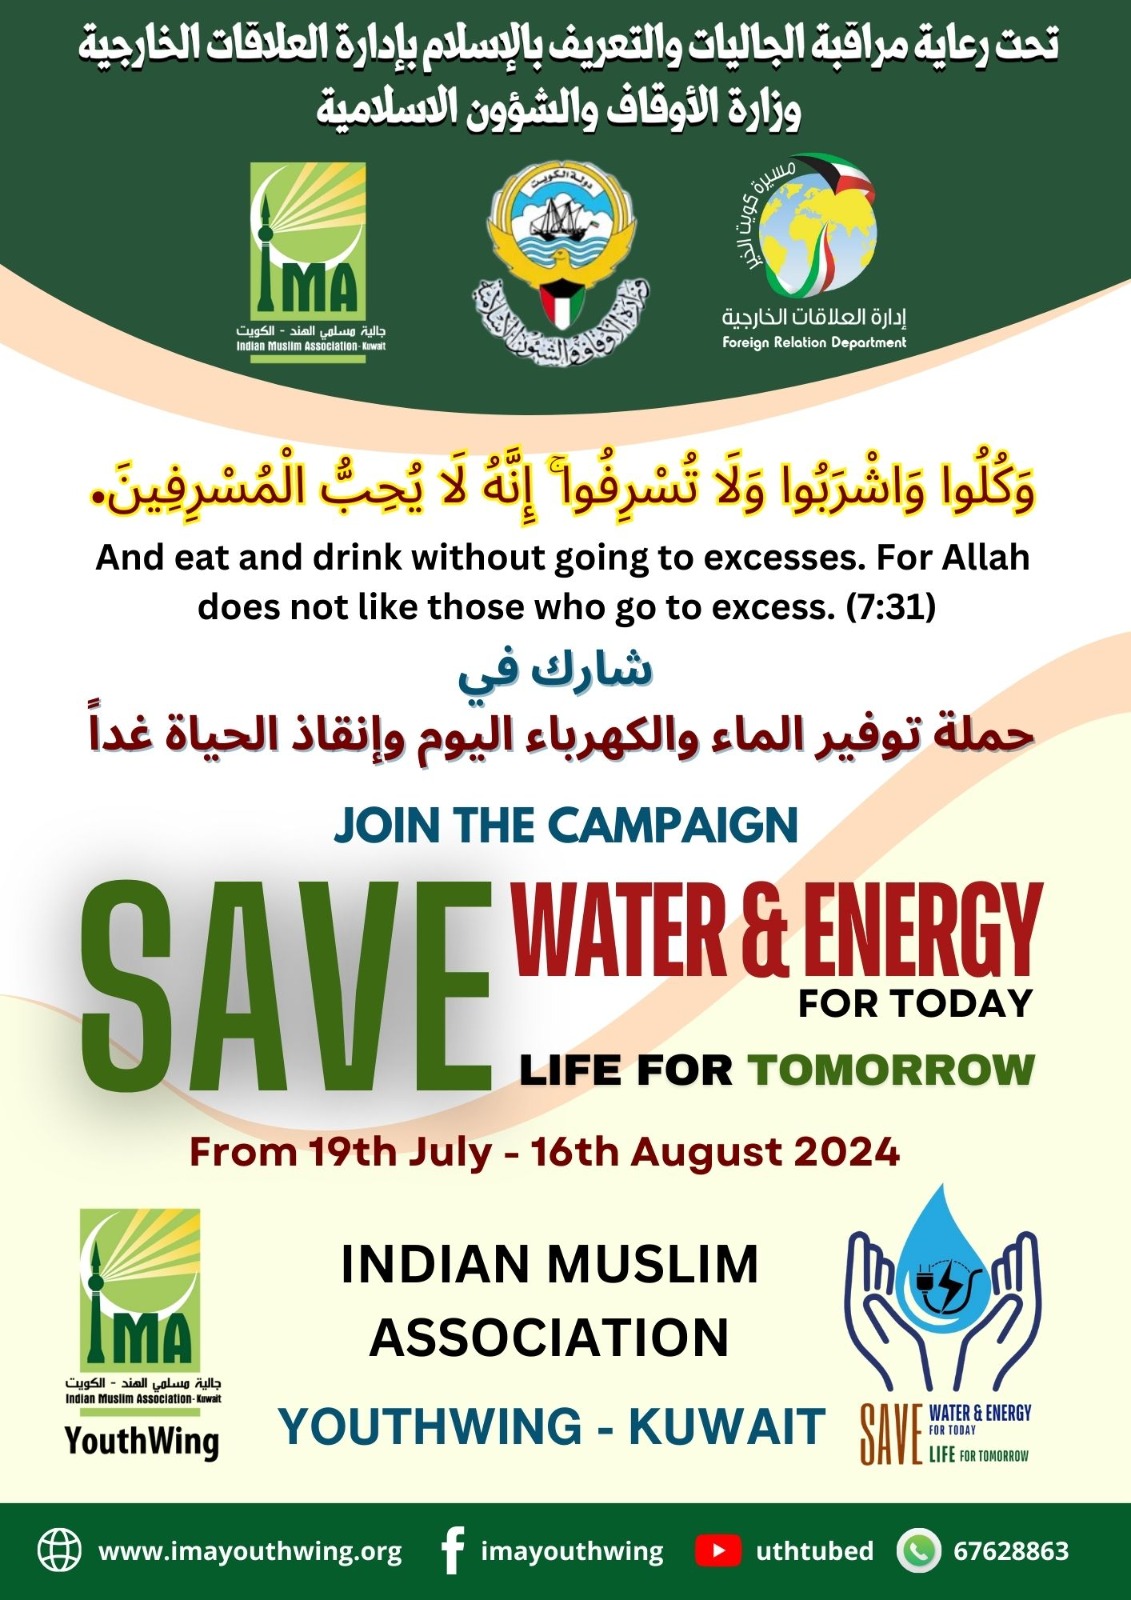 IMA-YouthWing Launching “Save Water, Energy for Today and Save Life for Tomorrow” Campaign